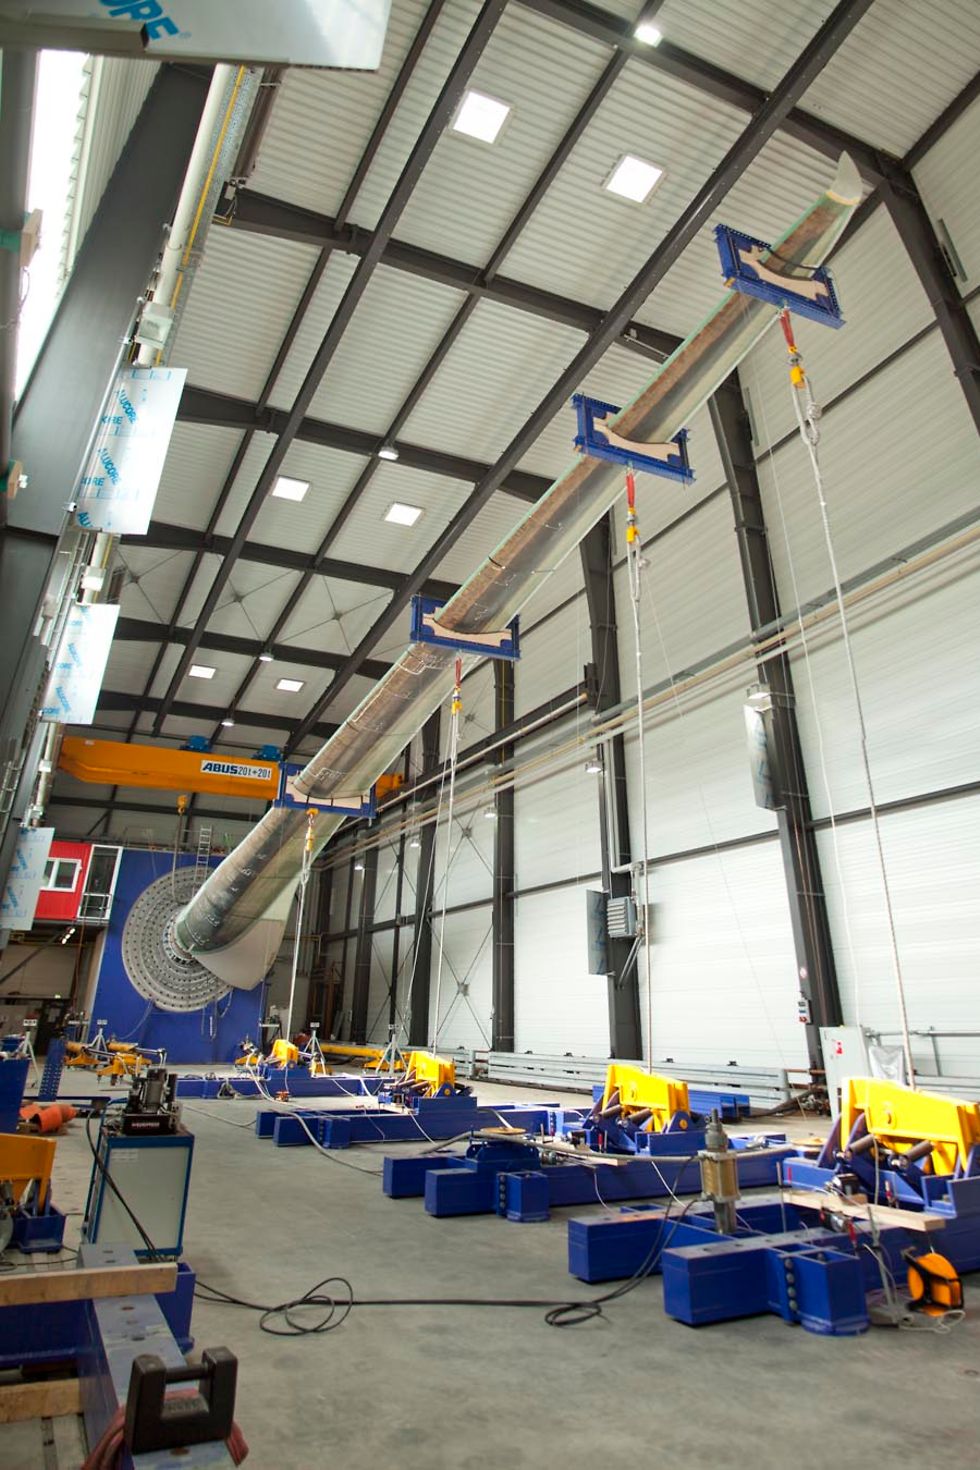 The IWES tested the 40-meter-long rotor blade in accordance with the IEC 61400-23 standard